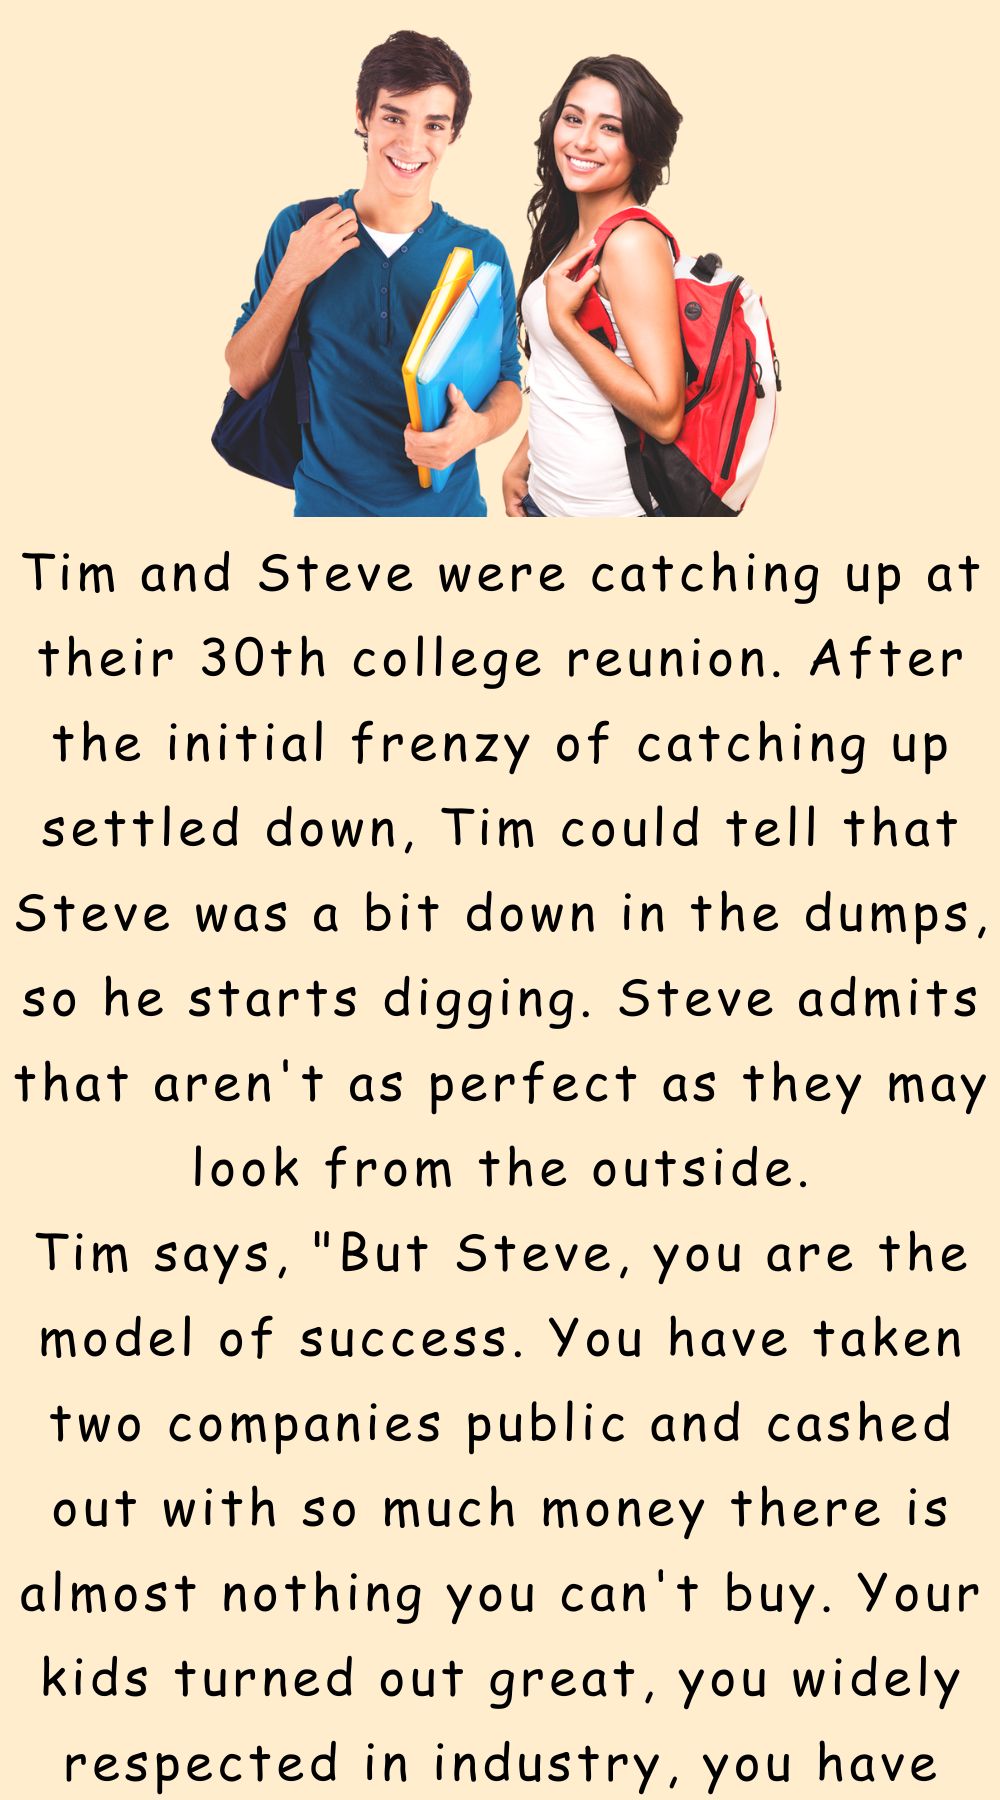 Tim and Steve were catching up at their 30th college